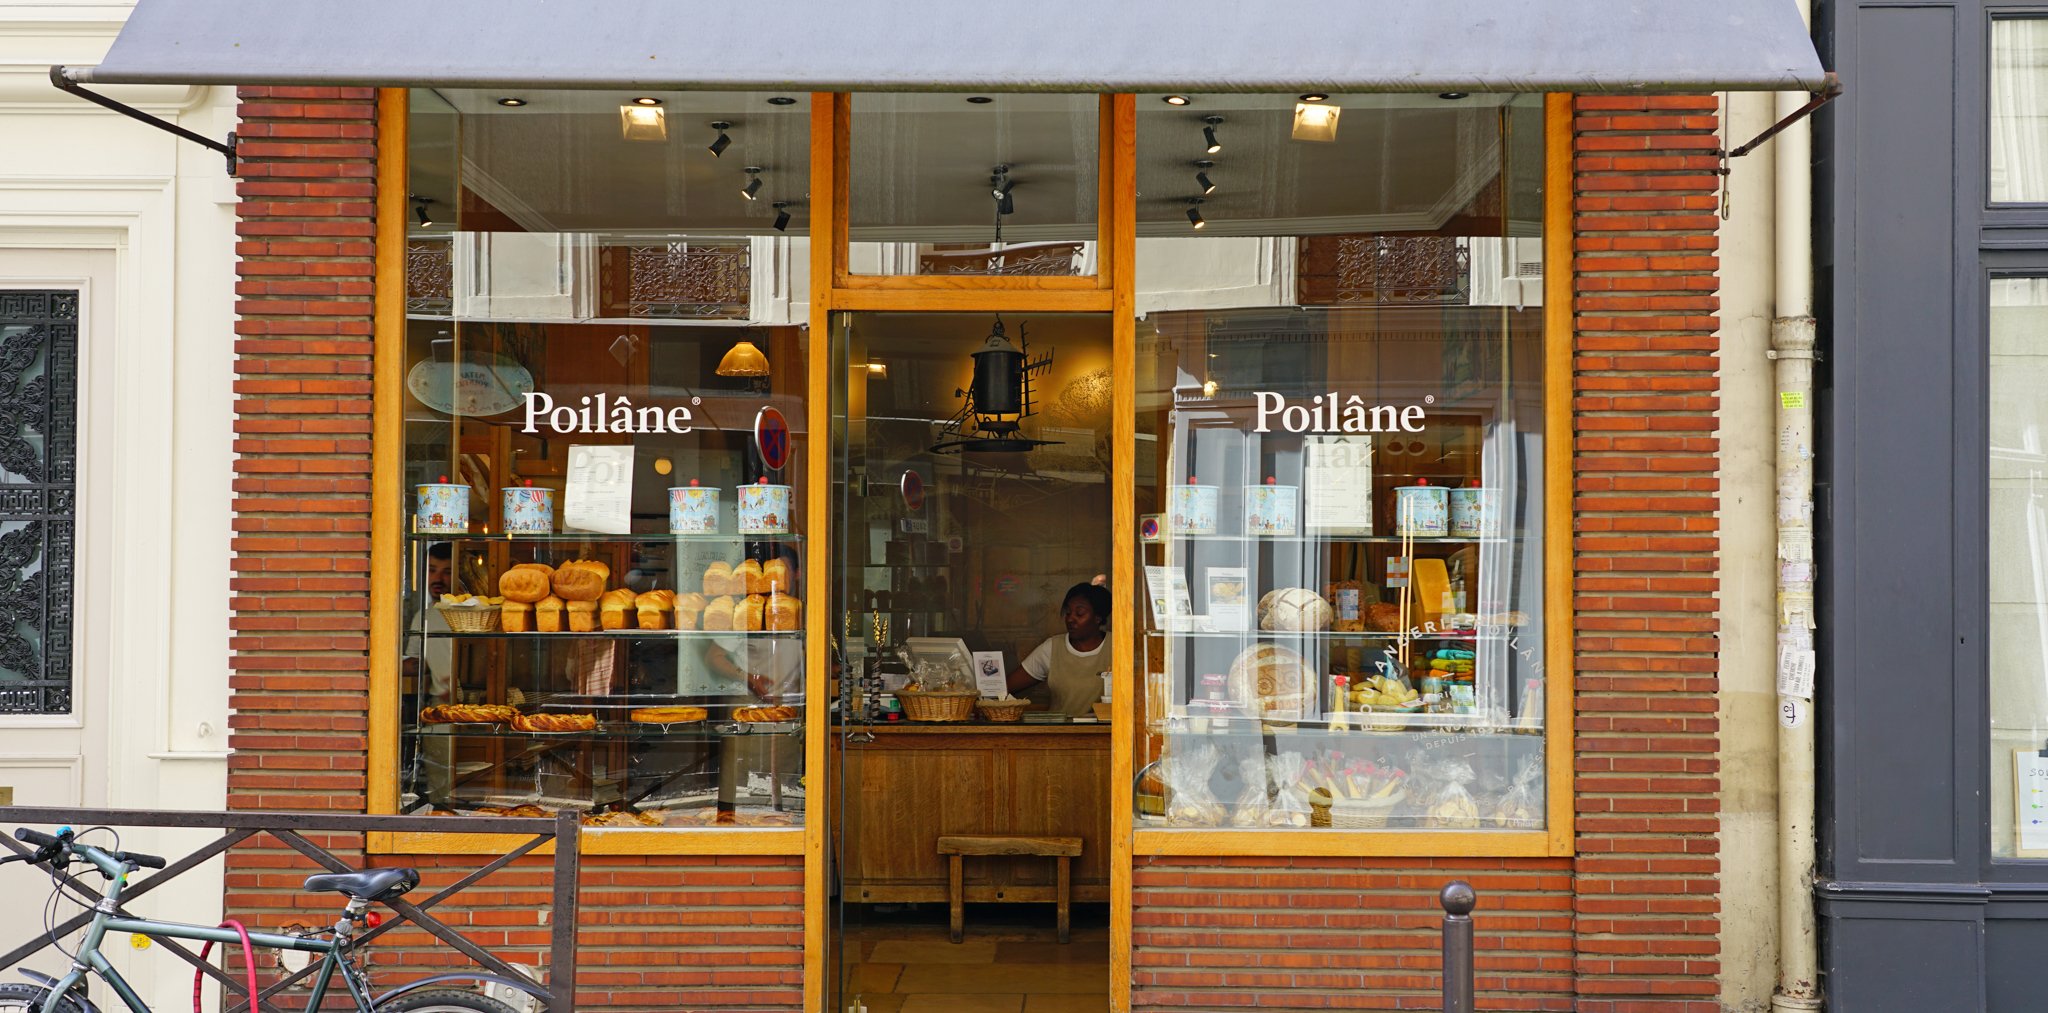 7 Best Bakeries In Paris According To A Former Baker